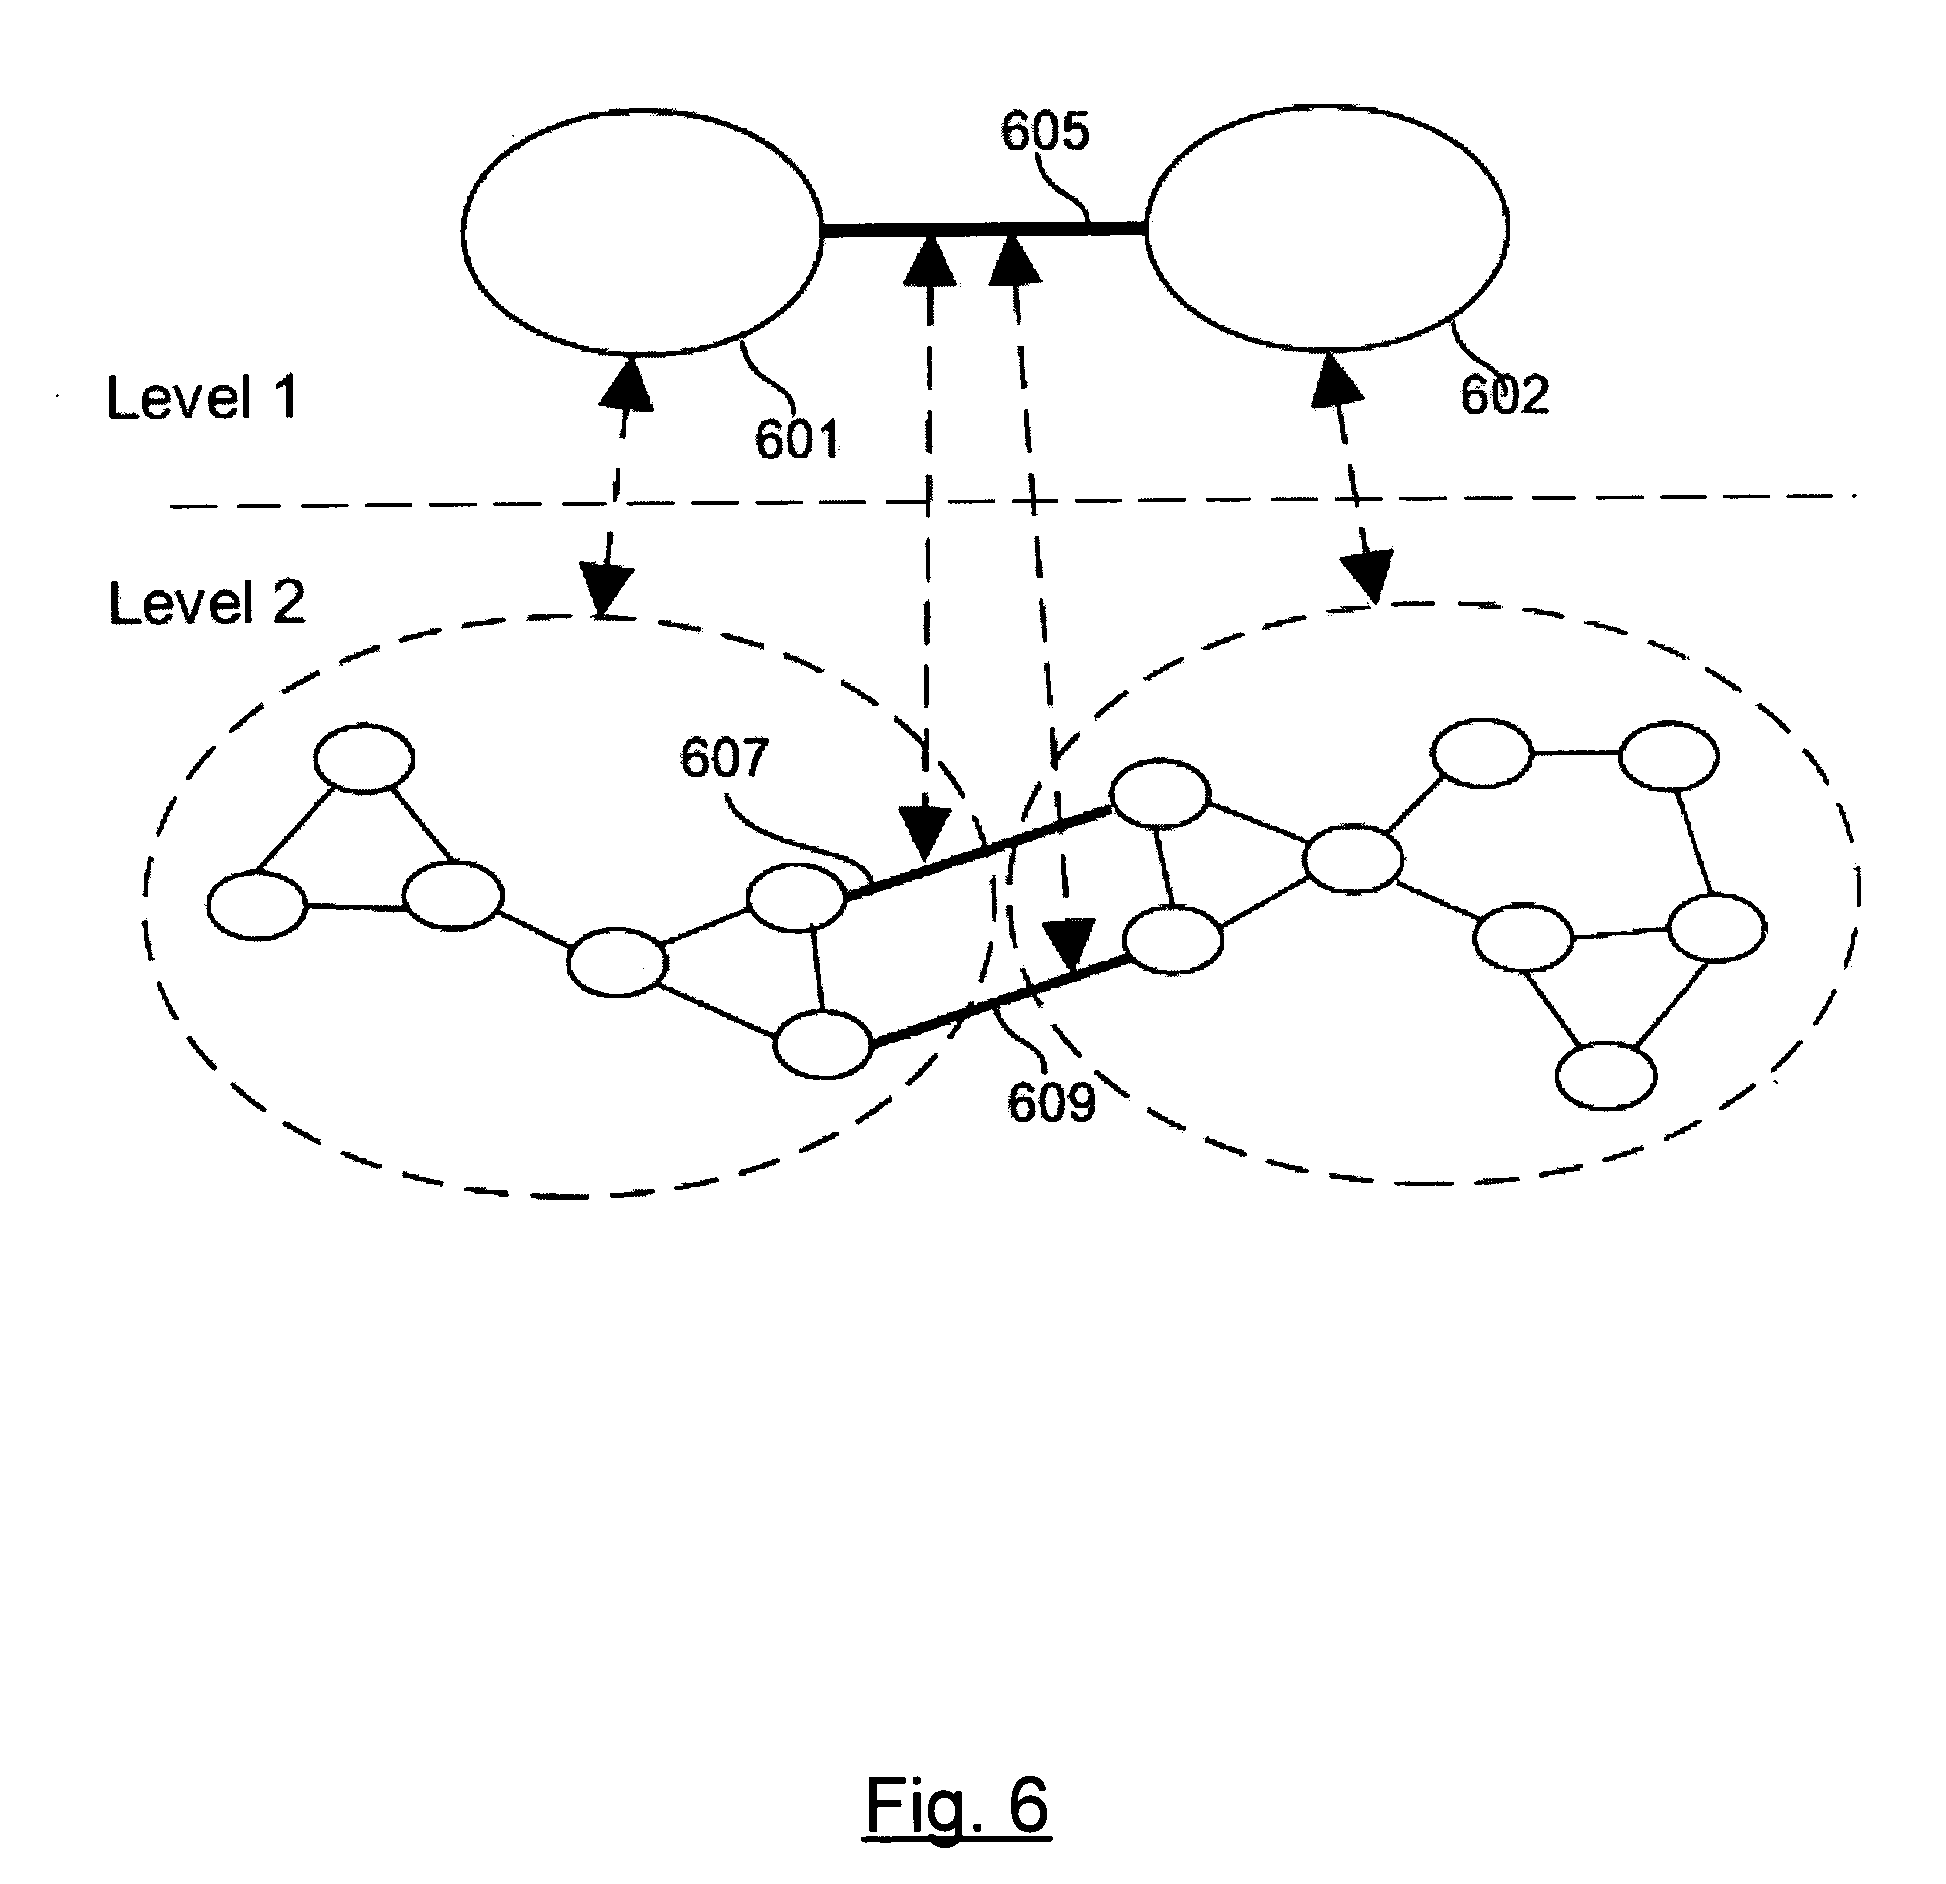 Incorporating network constraints into a network data model for a relational database management system